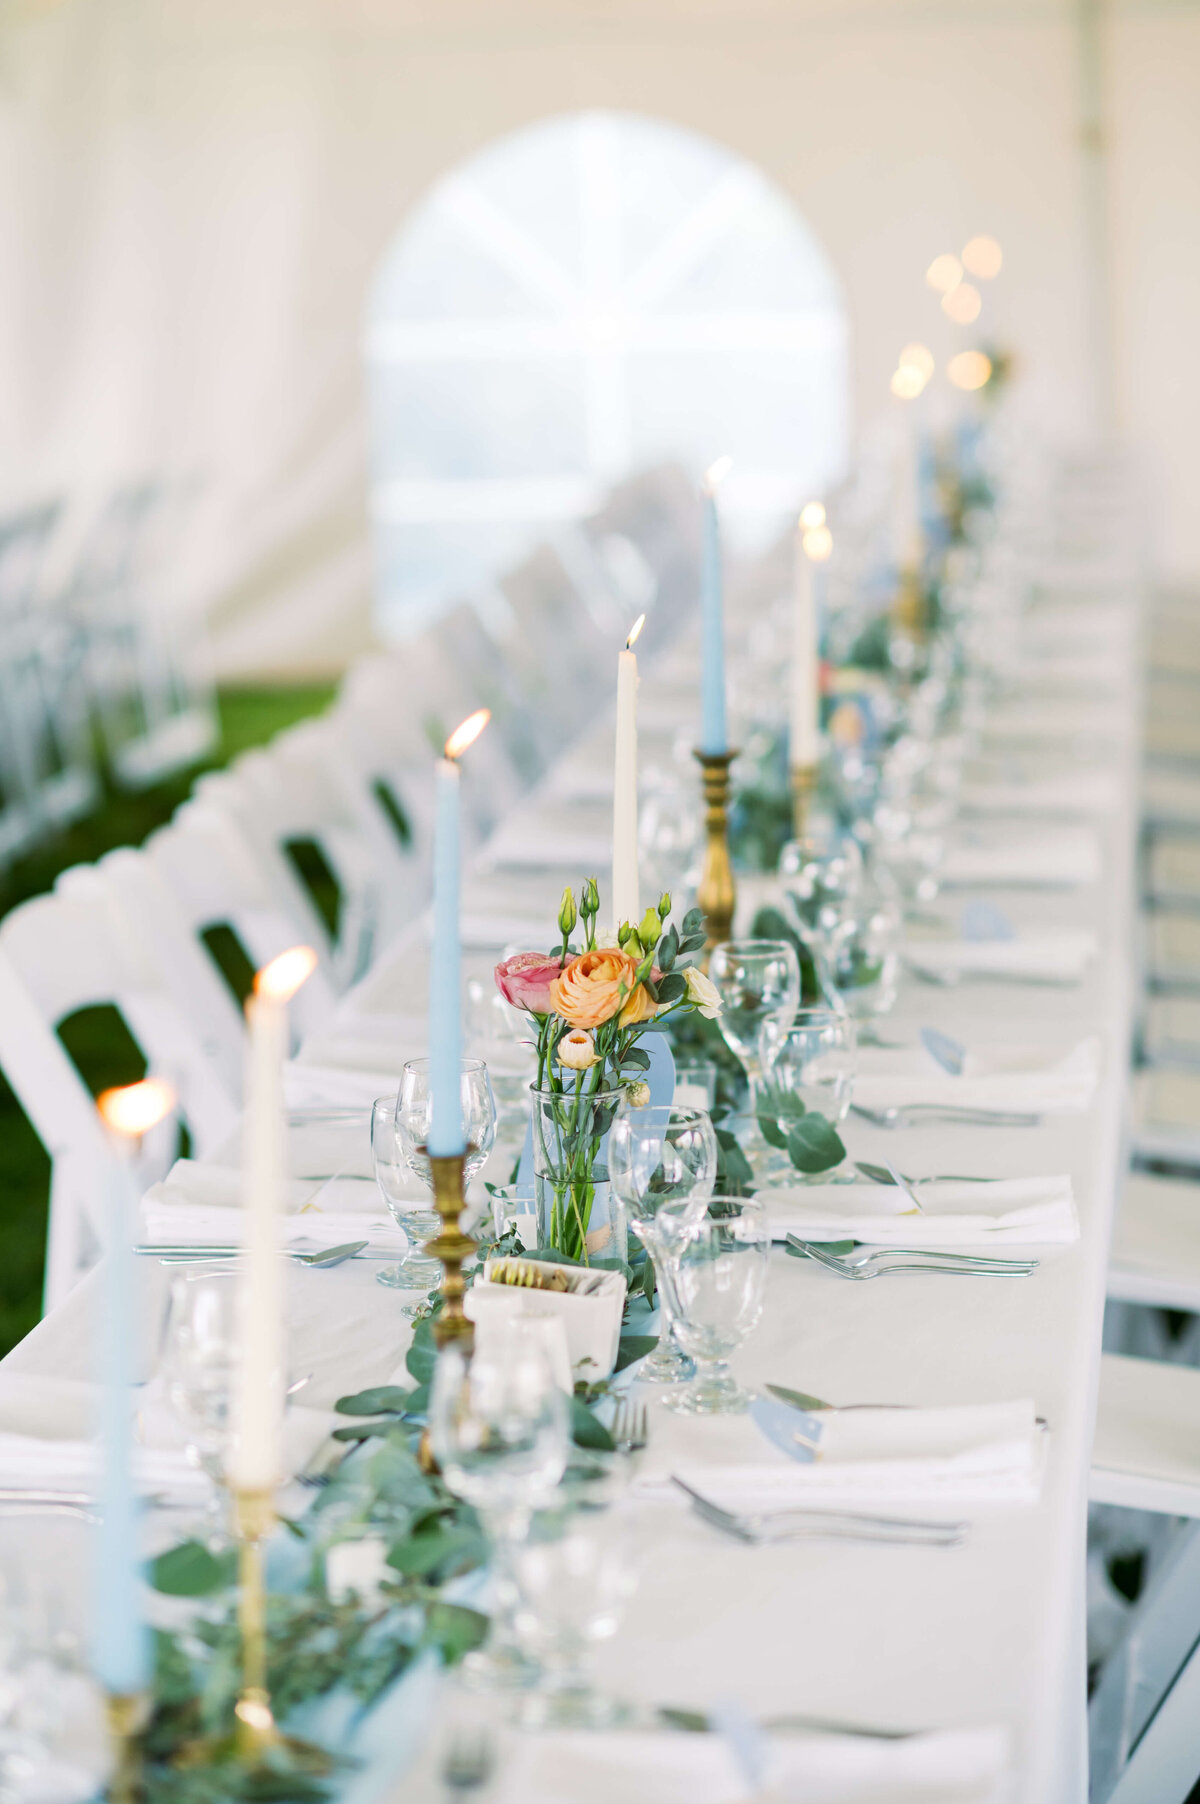 Wedding reception table with blue runner, greenery, candles and glasses